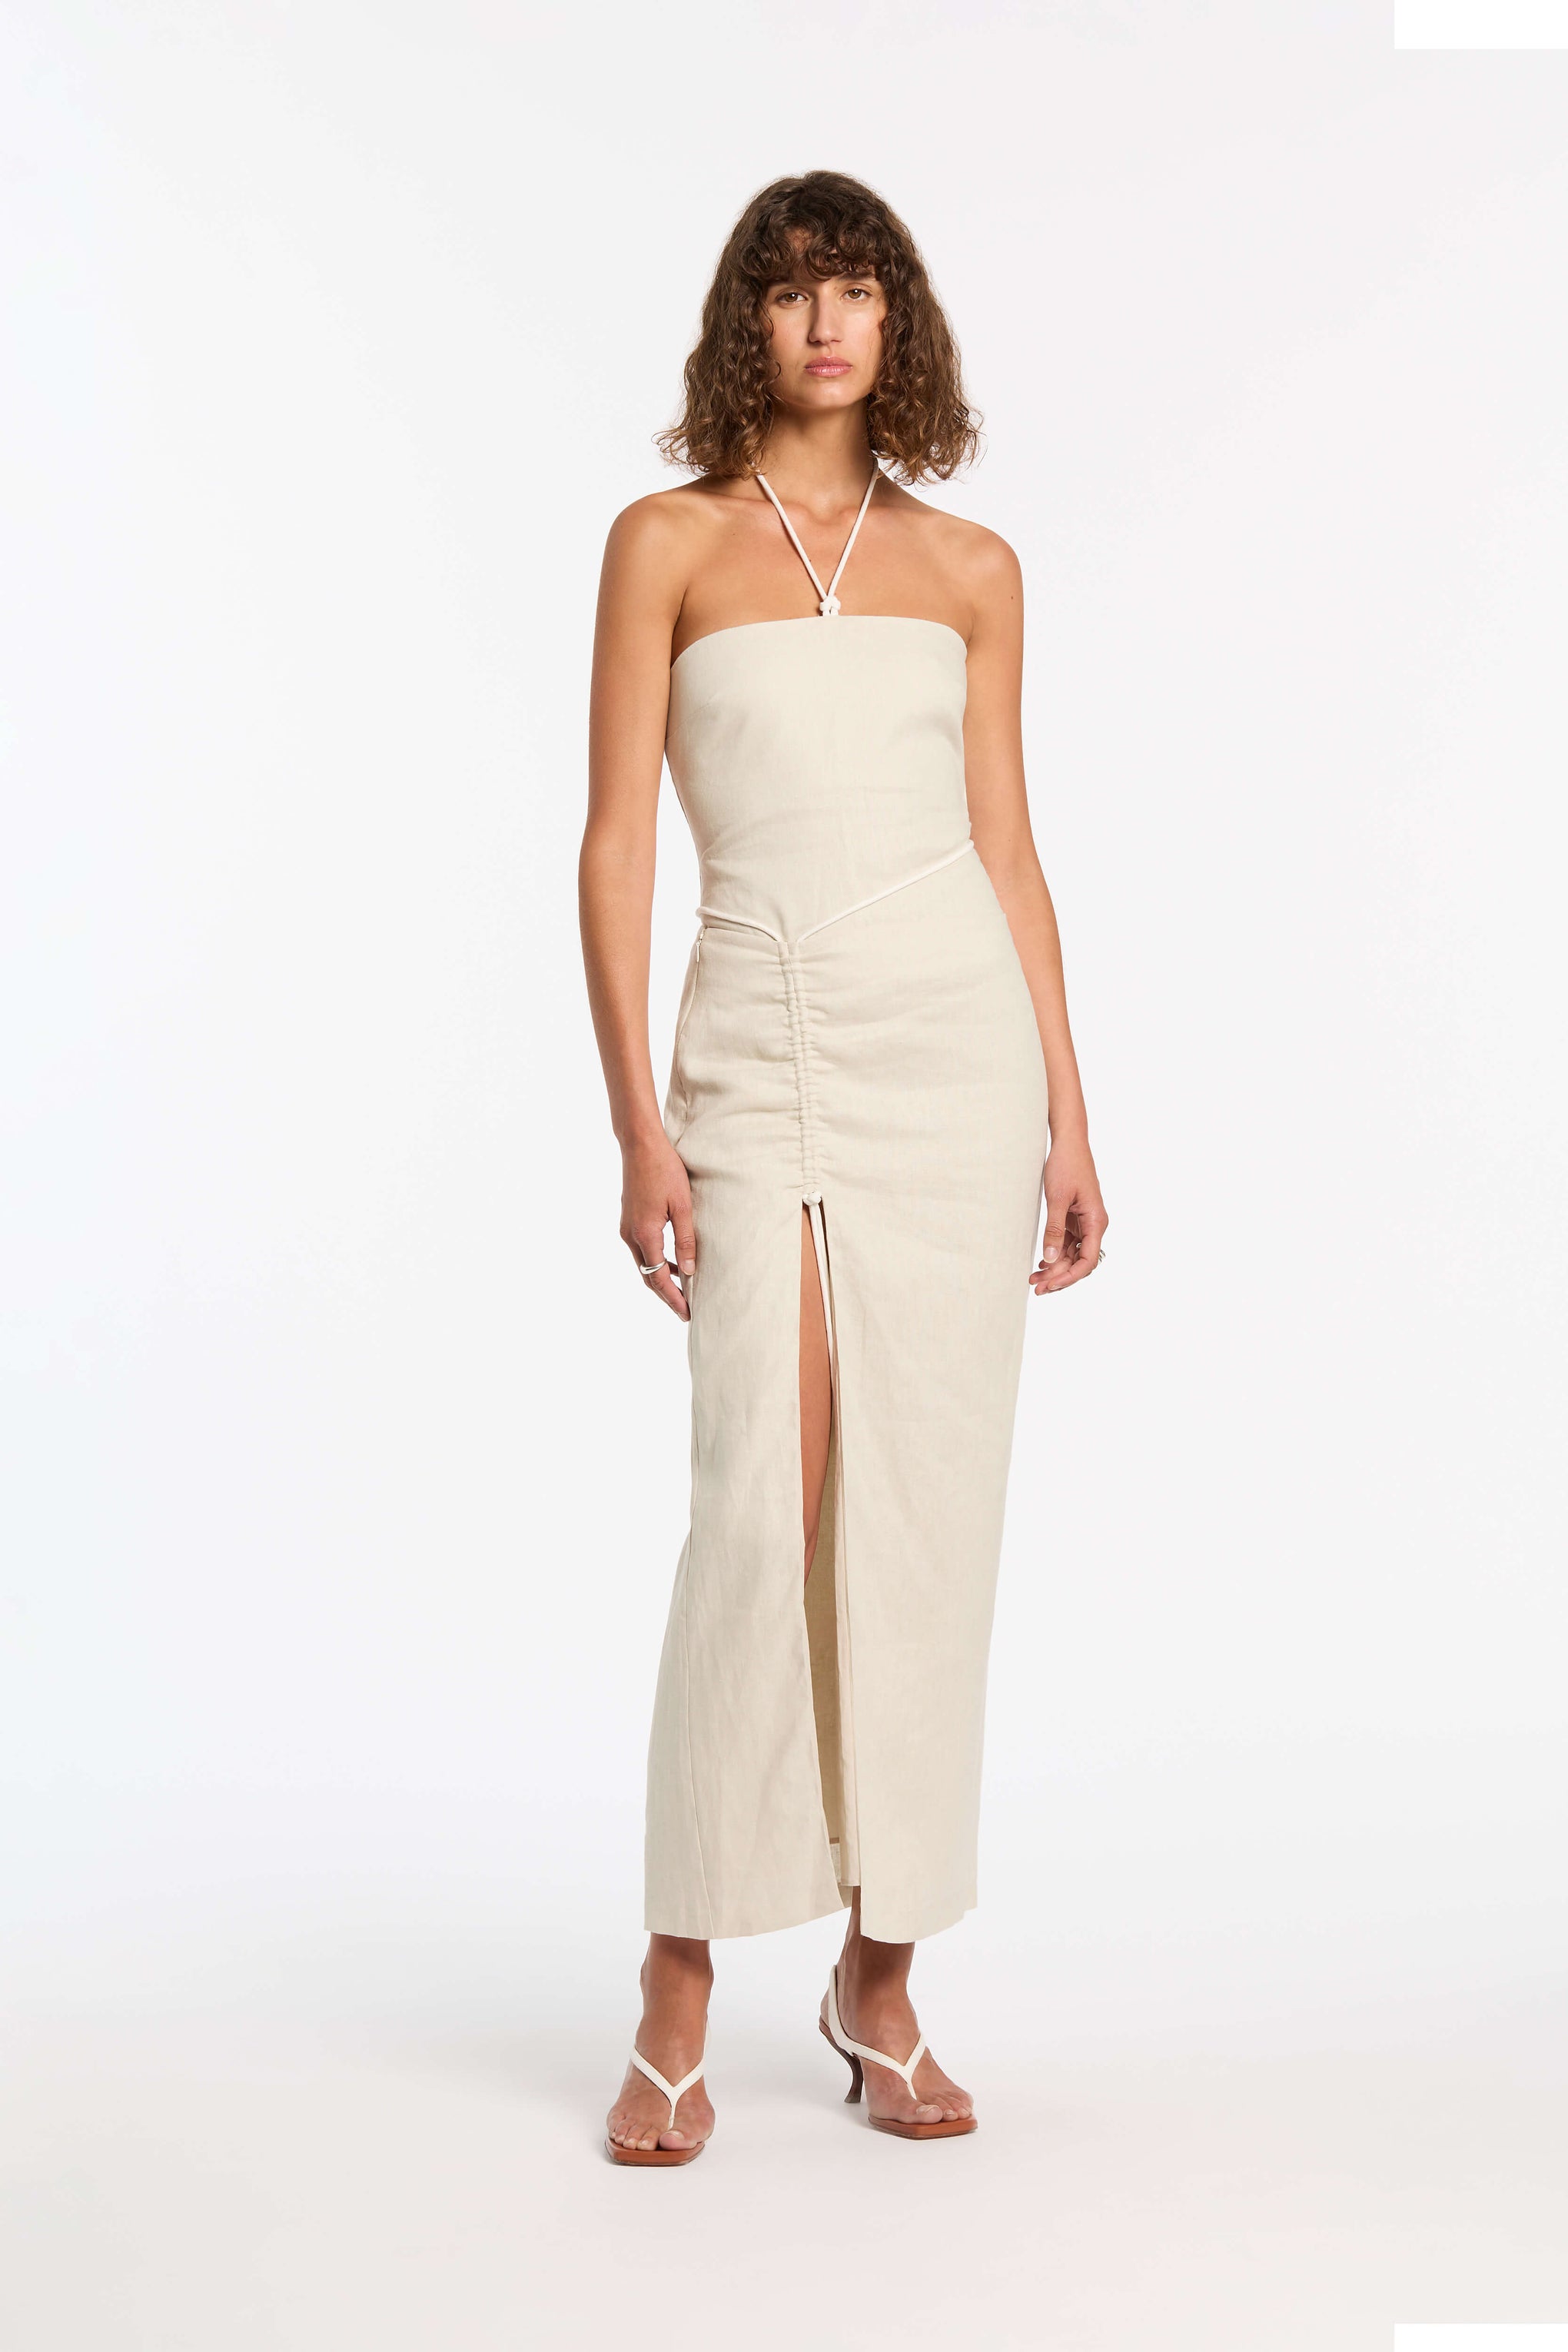 SIR Dorsay Corded Midi Skirt in Ecru available at TNT The New Trend Australia.